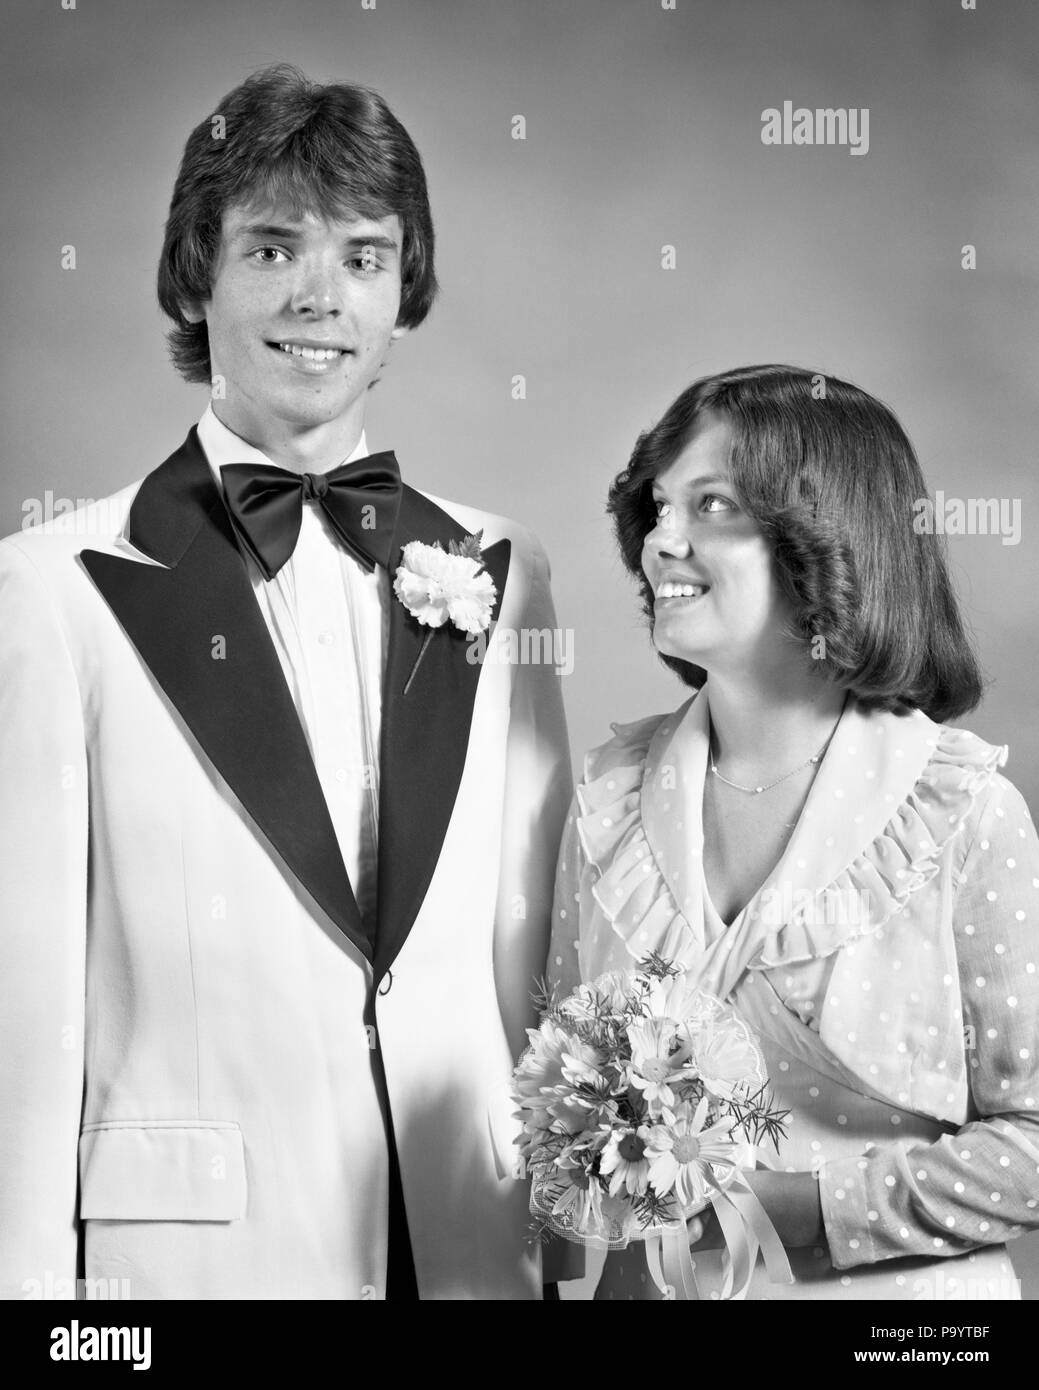 1970s TEEN COUPLE DRESSED UP FOR PROM DANCE FORMAL ATTIRE GIRL HOLDING BOUQUET LOOKING UP AT TALL BOY - j13789 HAR001 HARS JOY LIFESTYLE CELEBRATION FRIENDSHIP HALF-LENGTH INSPIRATION TEENAGE GIRL TEENAGE BOY CONFIDENCE EXPRESSIONS B&W EYE CONTACT DREAMS HAPPINESS CHEERFUL EXCITEMENT AT HIGH SCHOOL SMILES HIGH SCHOOLS CONNECTION JOYFUL STYLISH ATTIRE DRESSED UP GROWTH LOOKING UP TOGETHERNESS BLACK AND WHITE CAUCASIAN ETHNICITY HAR001 OLD FASHIONED Stock Photo